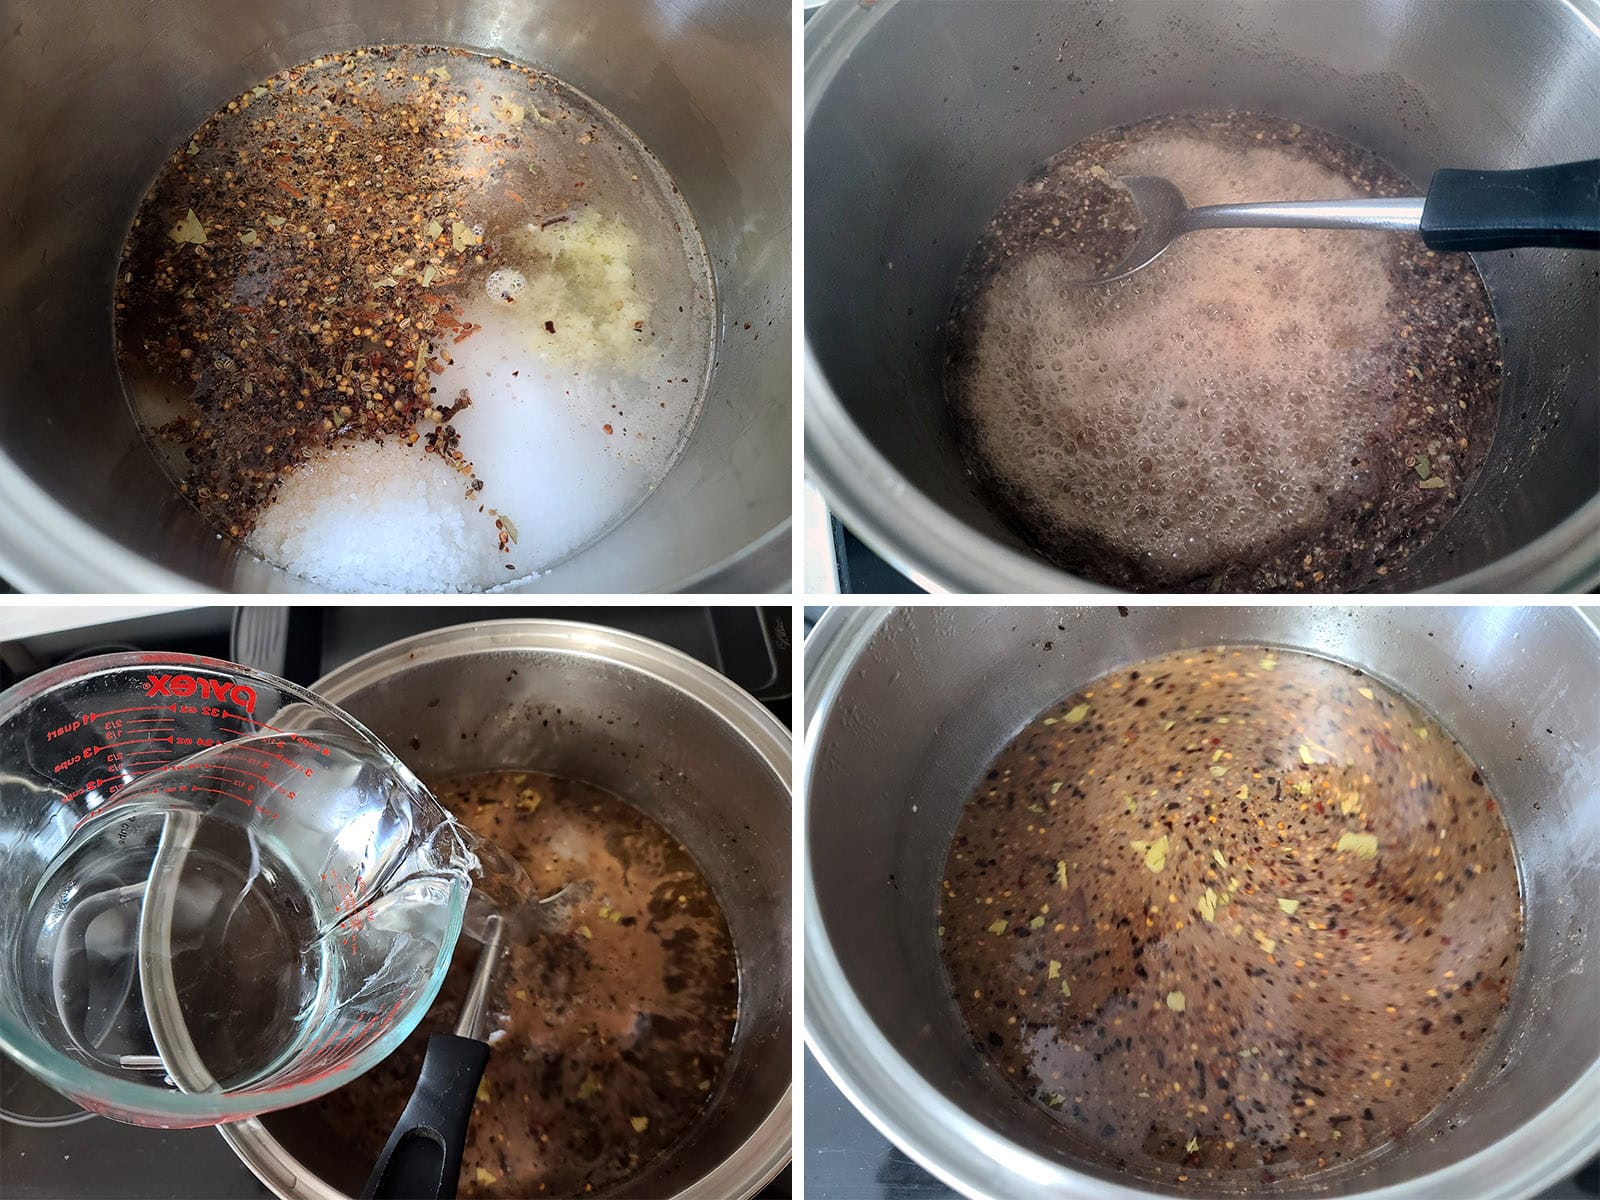 A 4 part image showing the water, salt, and pickling spice being cooked into a brine.